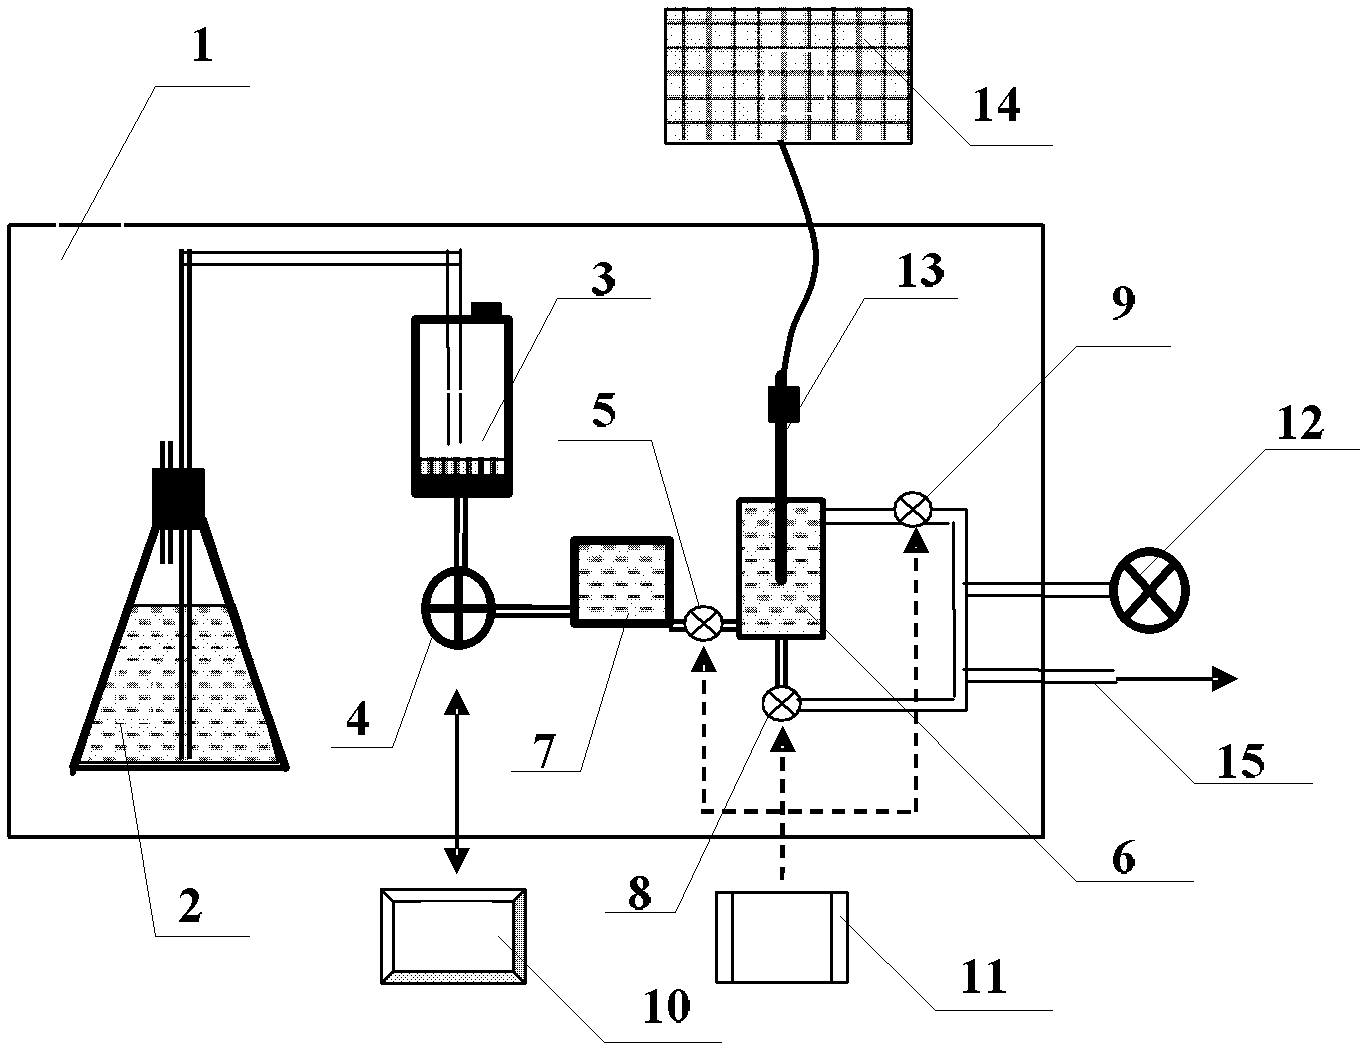 System for measuring and analyzing parameters of surface property of material based on dynamic method